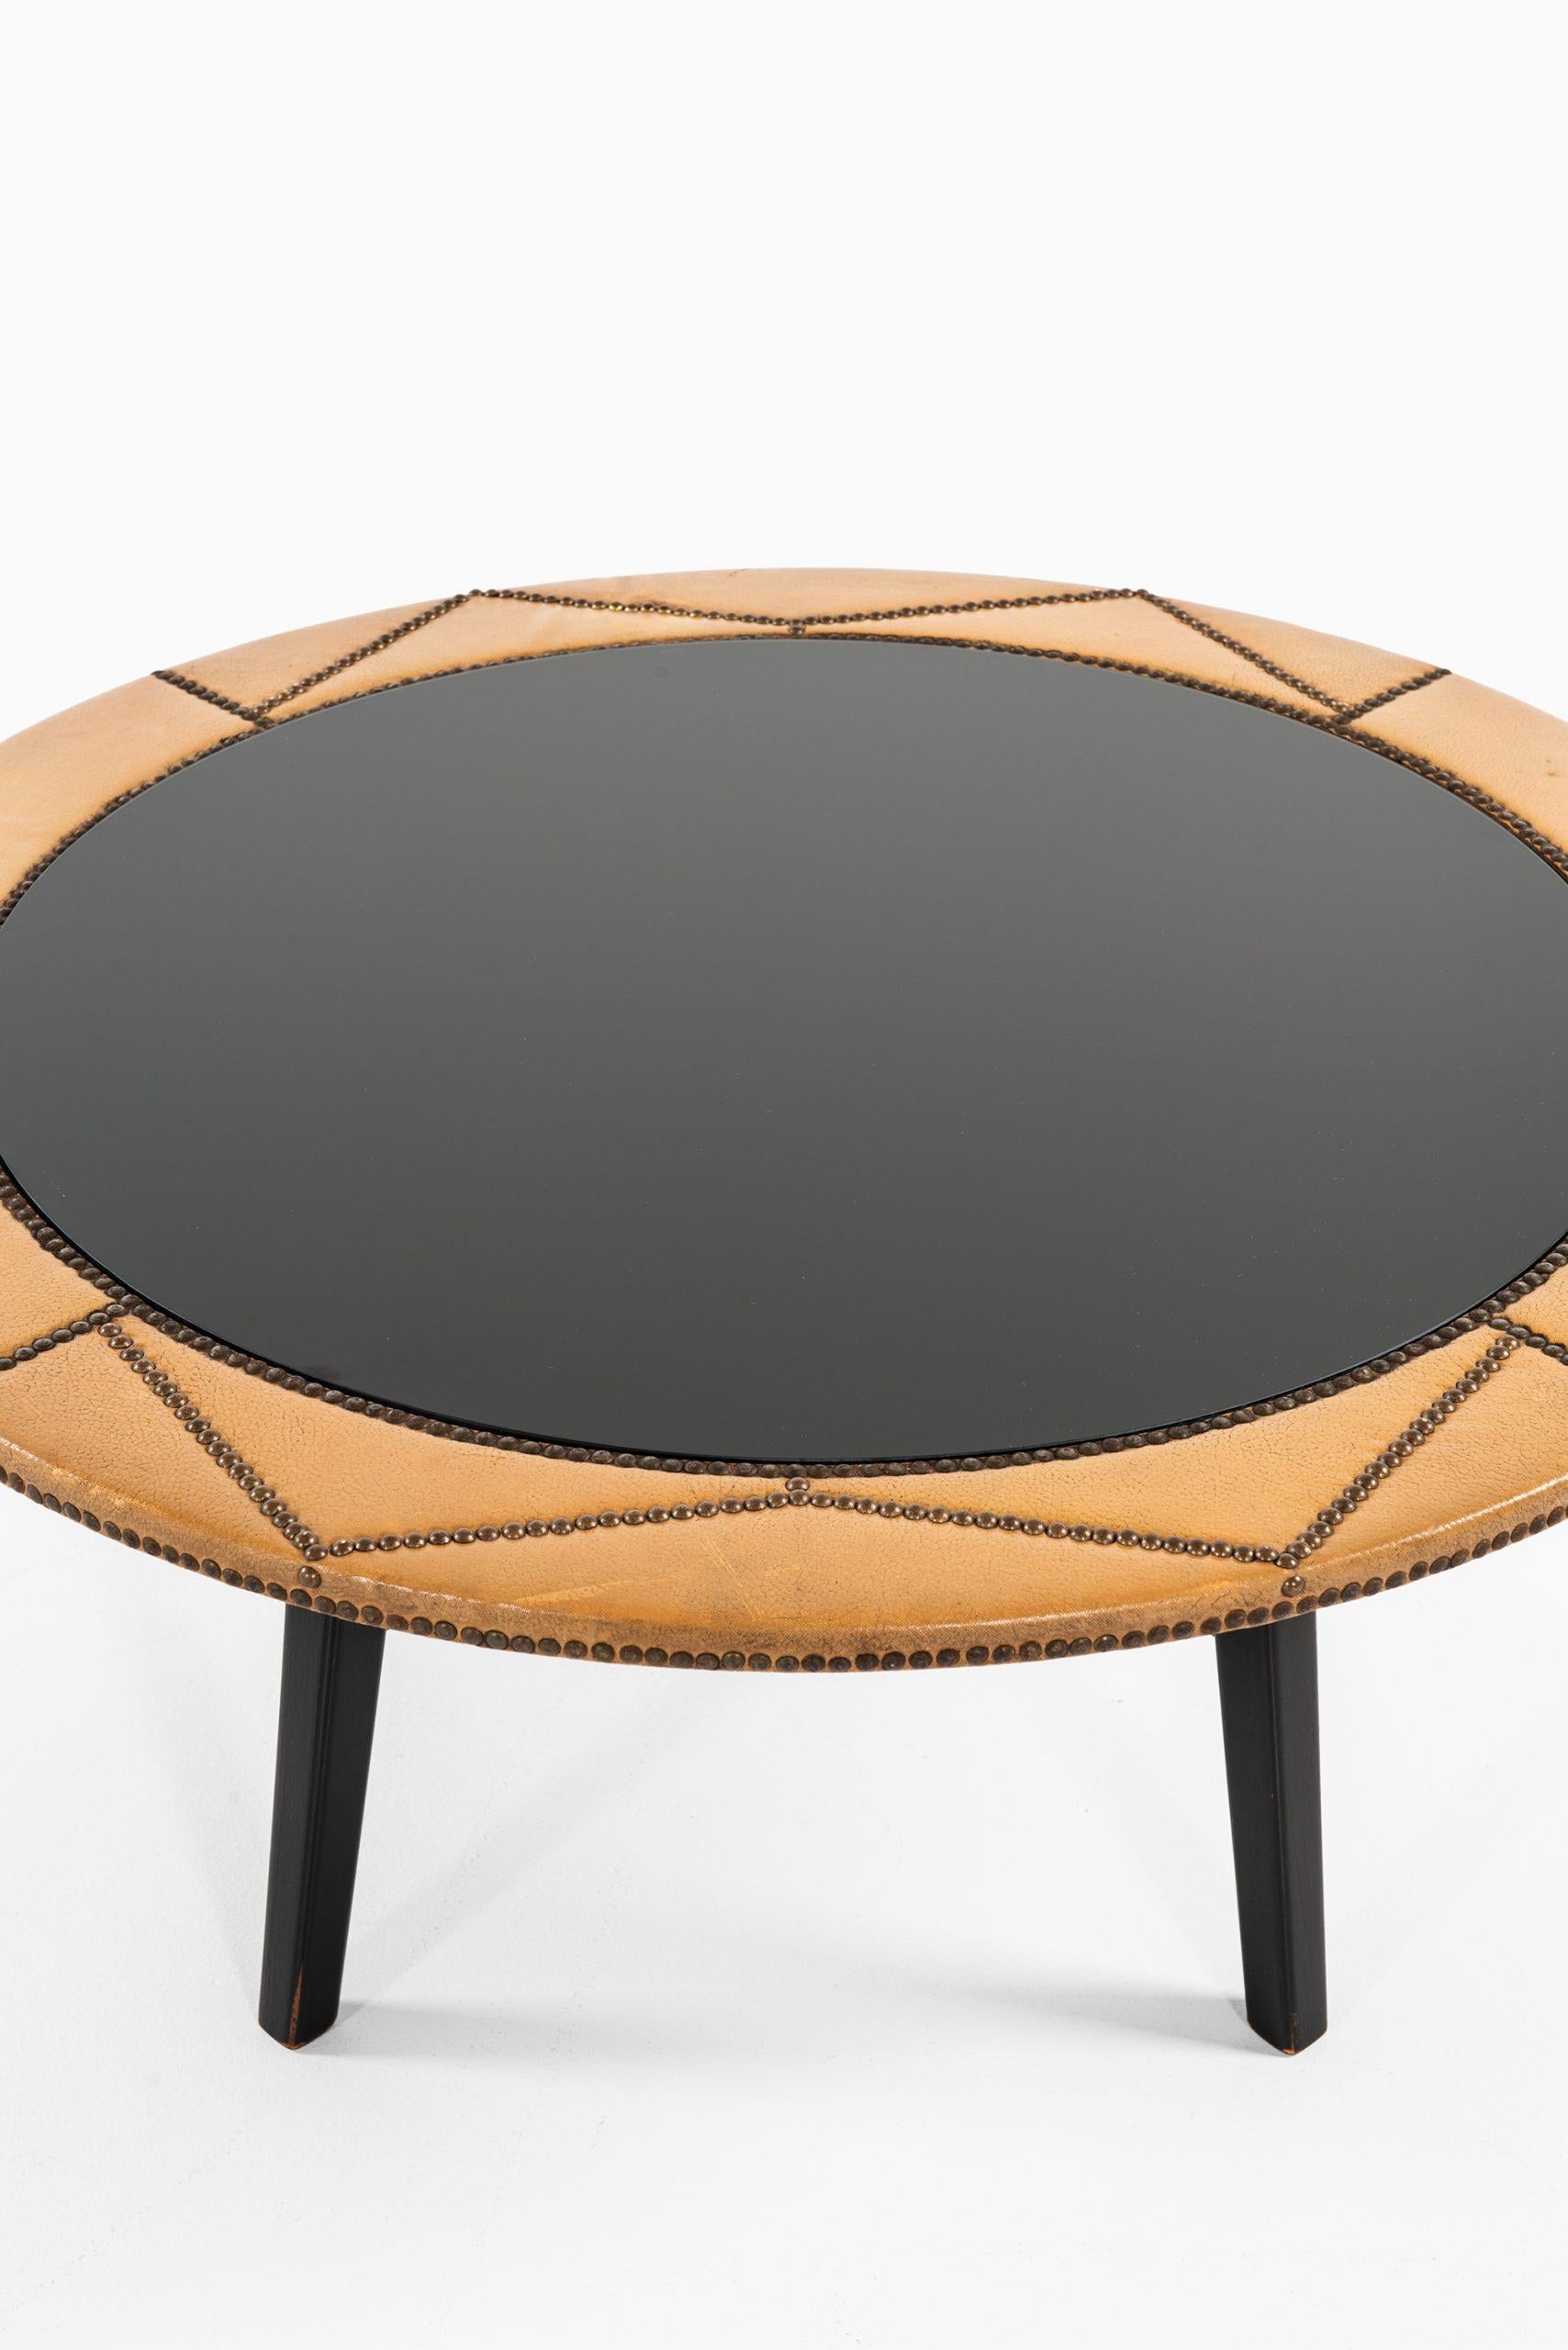 Scandinavian Modern Otto Schulz Coffee Table Produced by Boet in Sweden For Sale